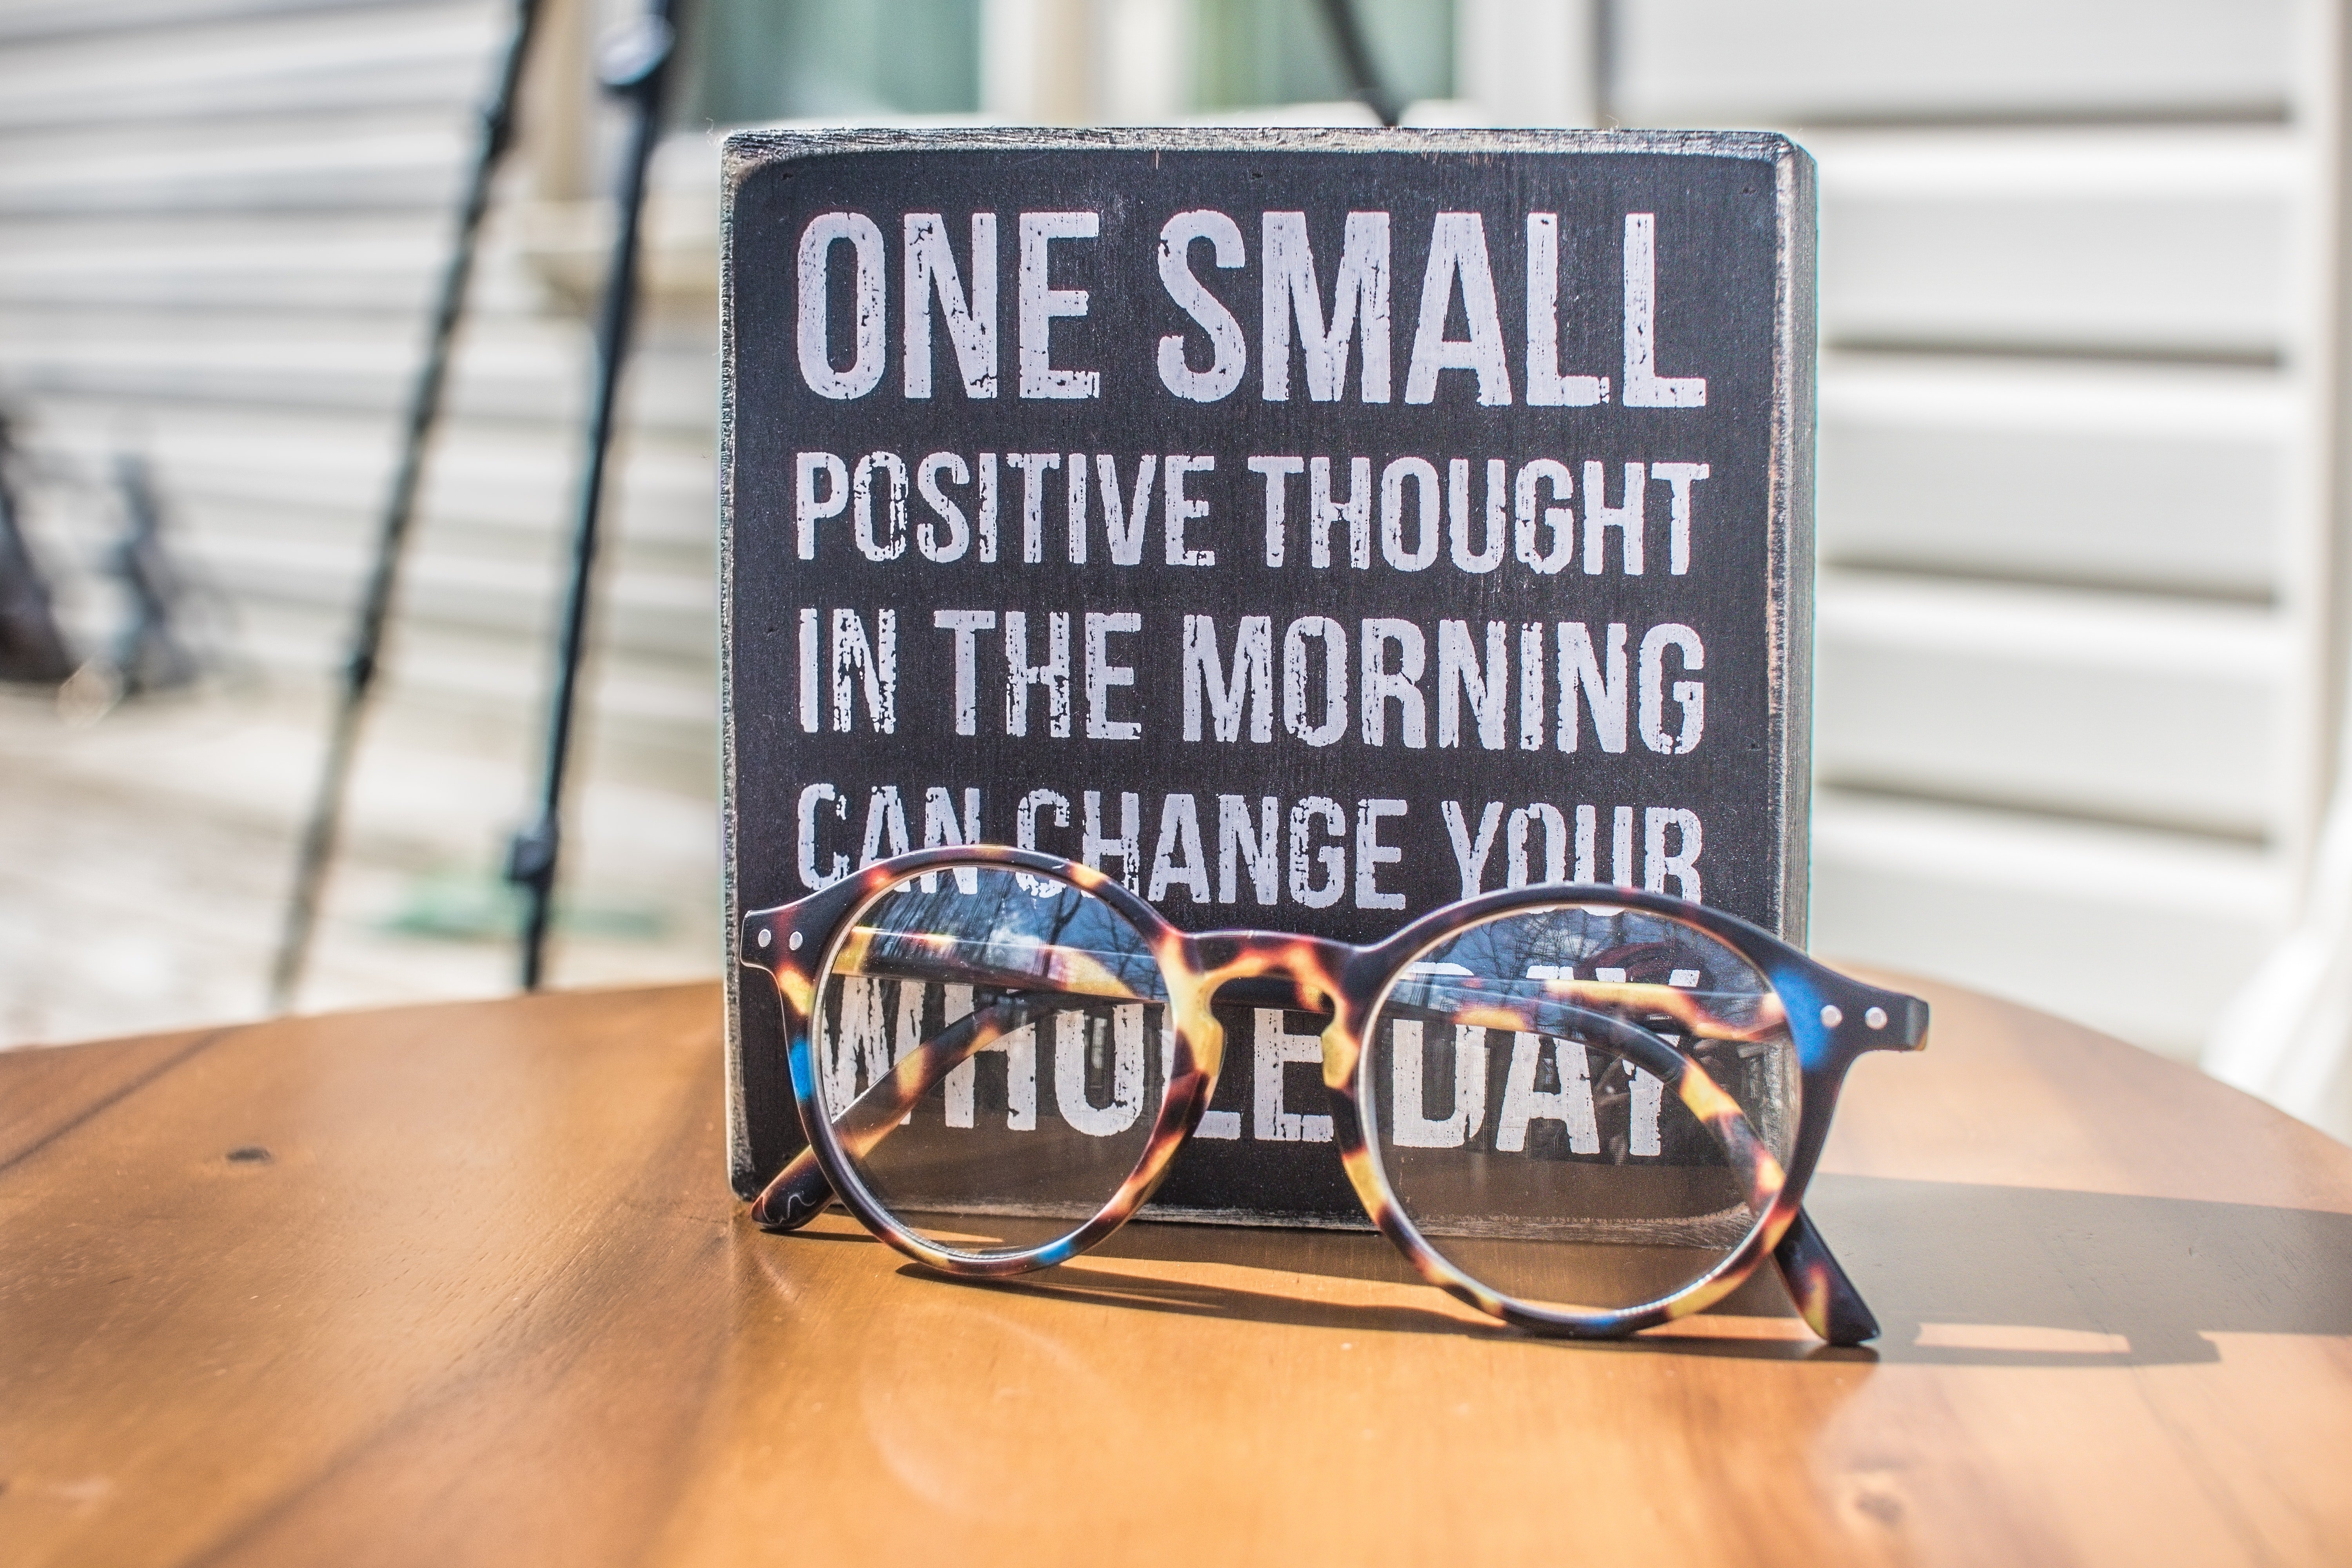 A sign promoting positive thinking | Source: Pexels